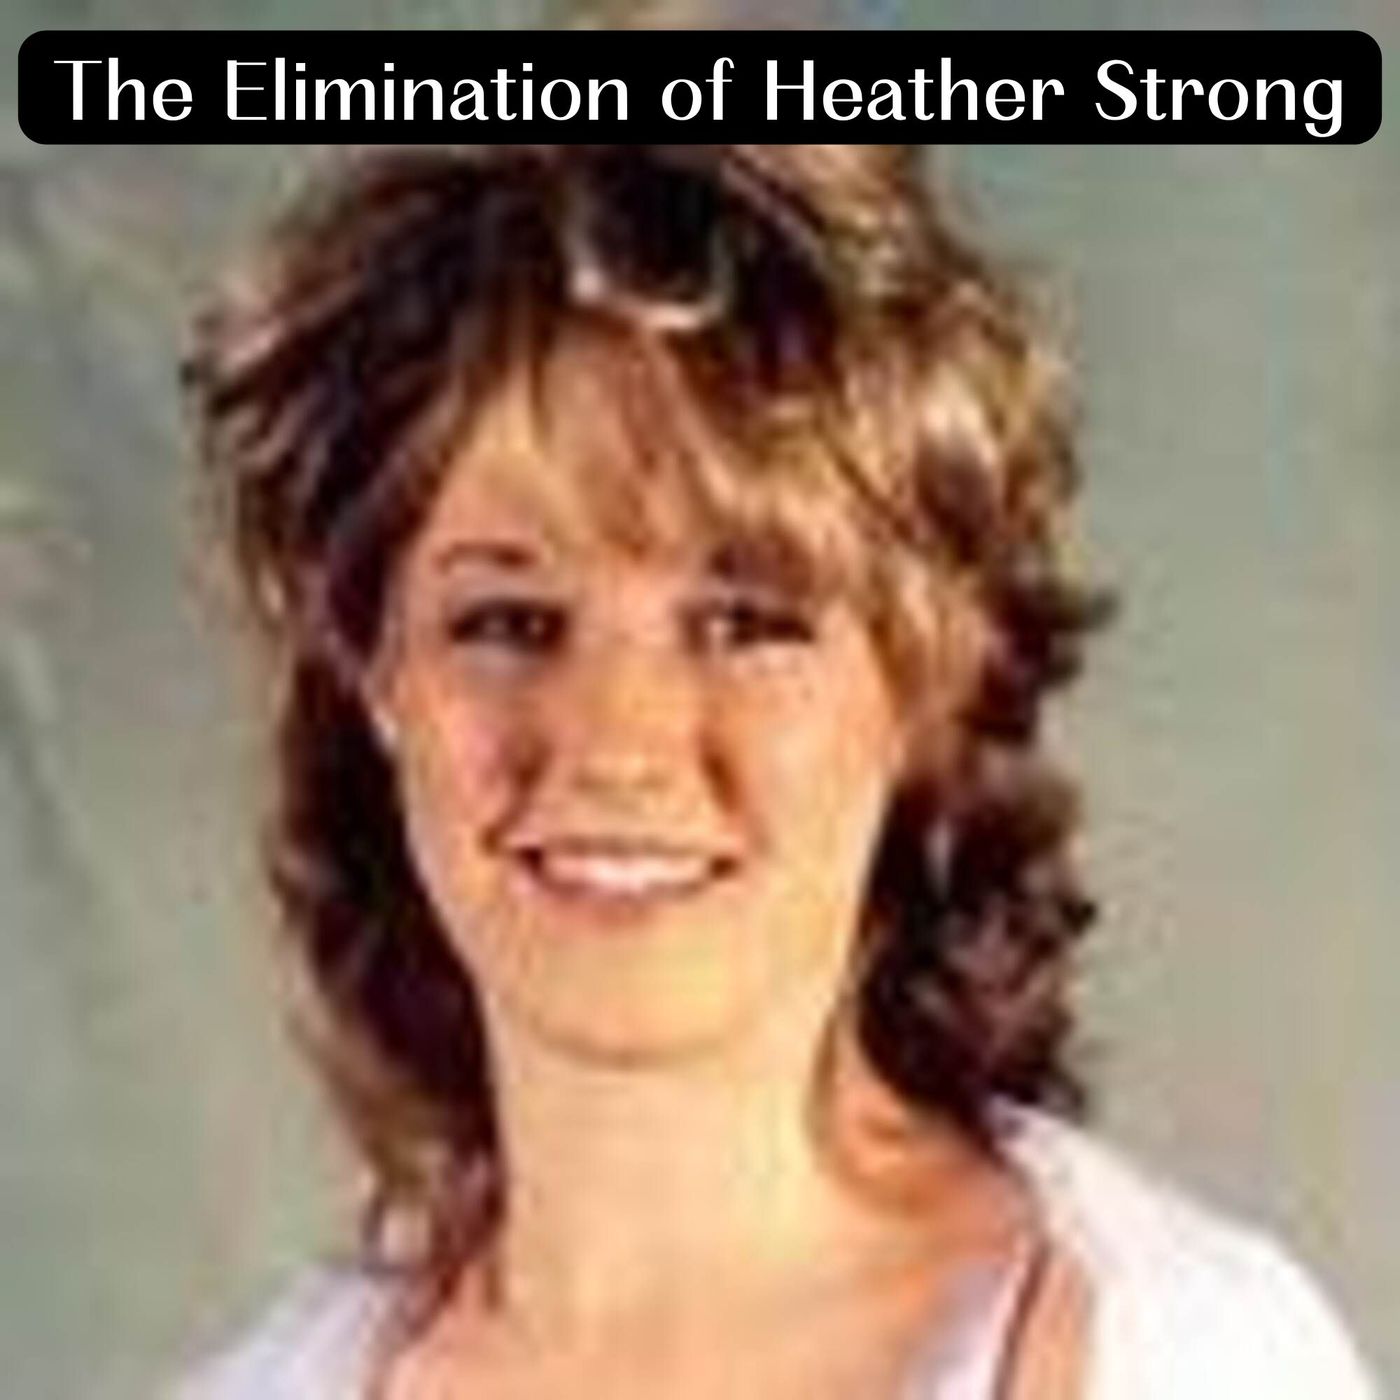 The Elimination of Heather Strong